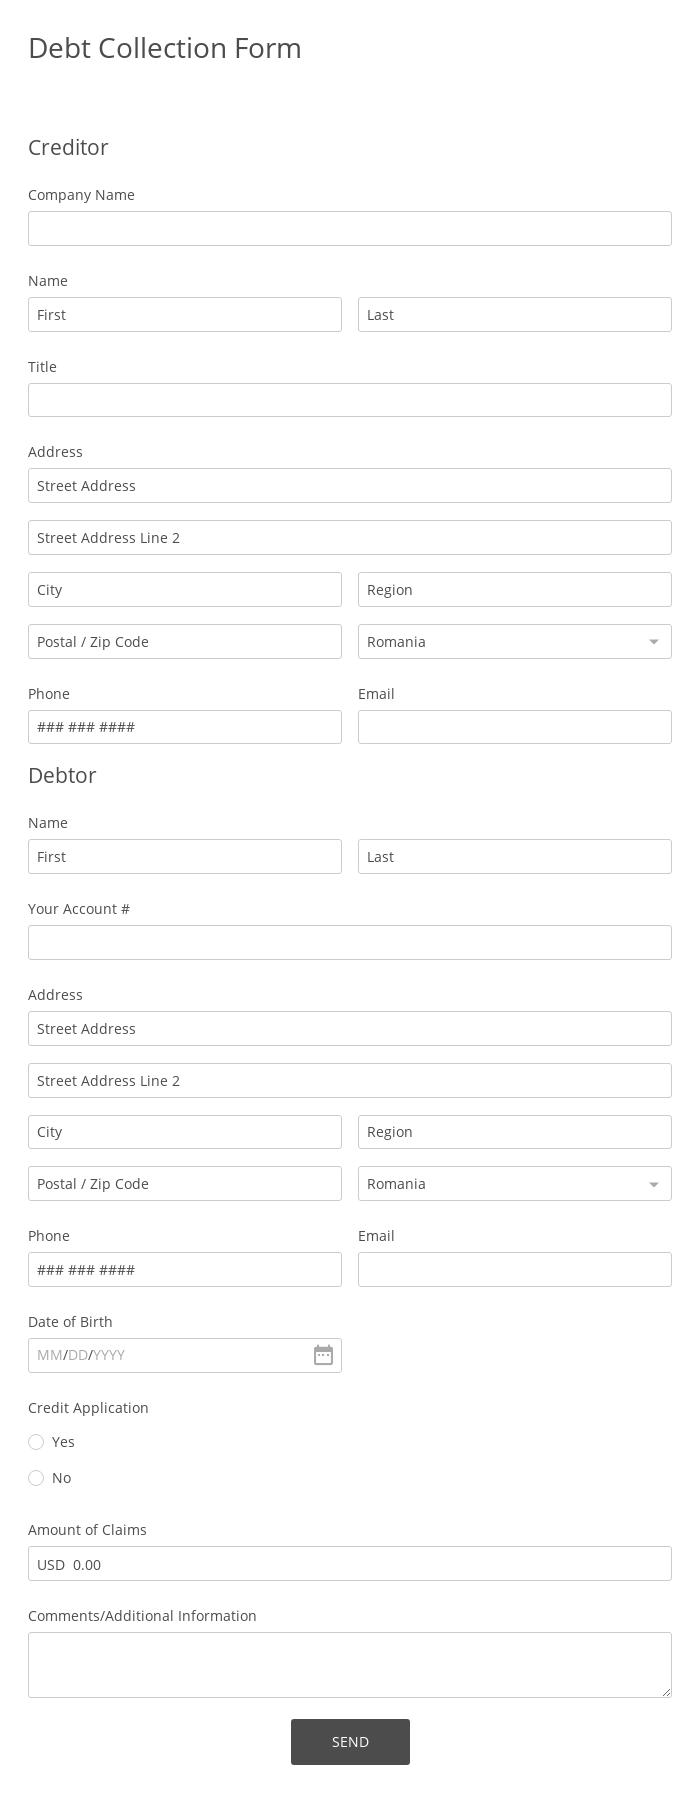 Debt Collection Form